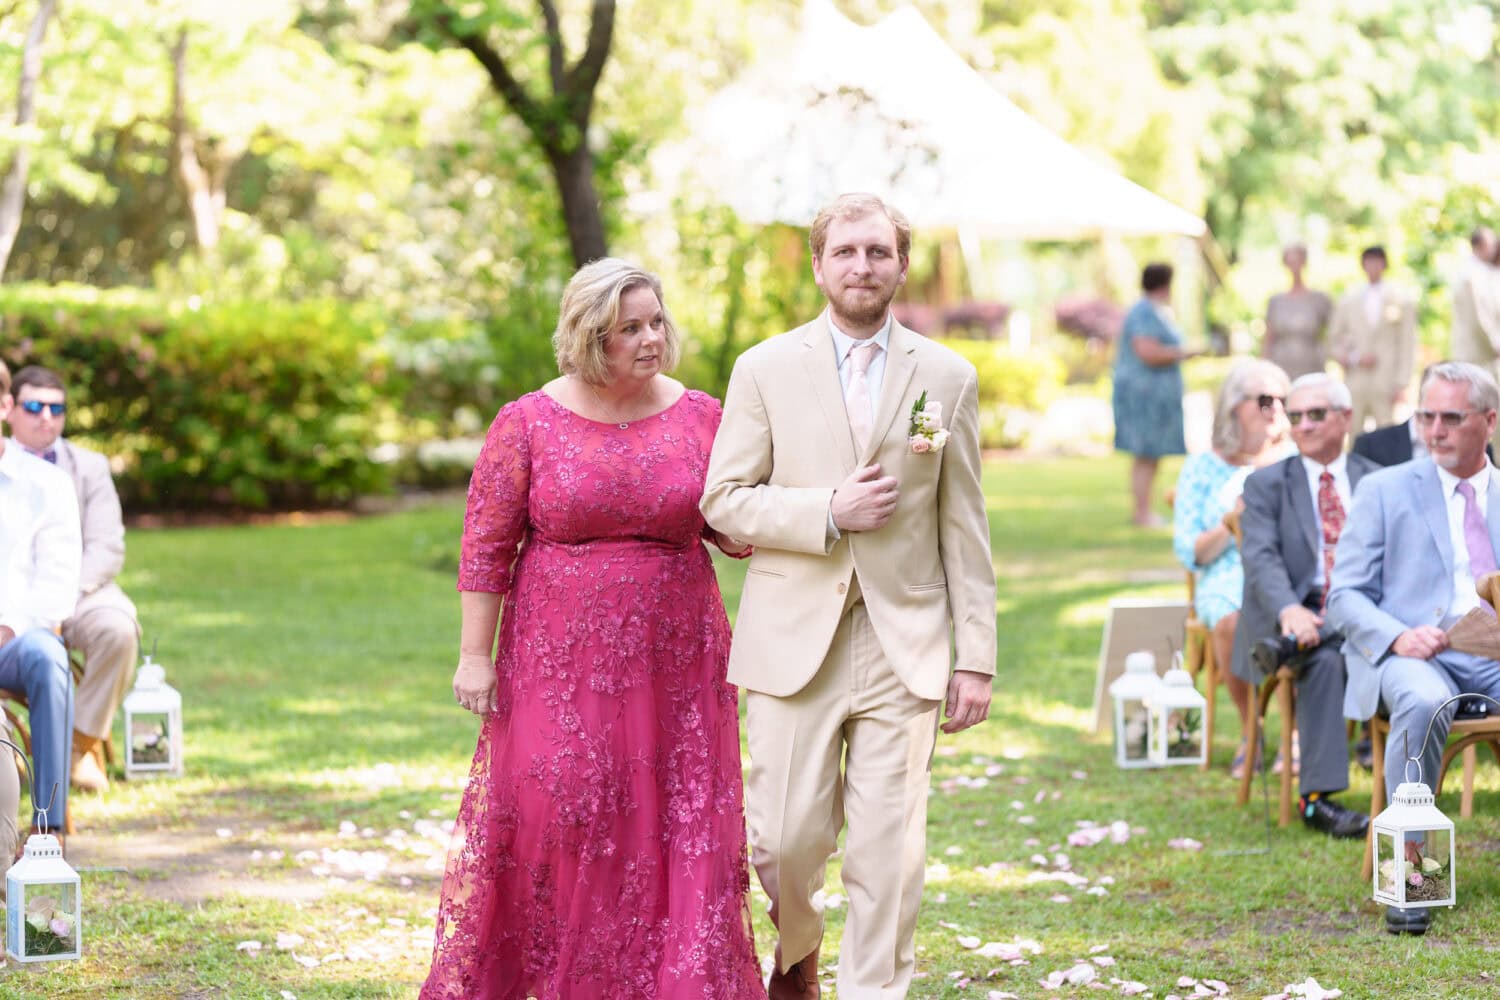 Walking to the ceremony - Tanglewood Plantation